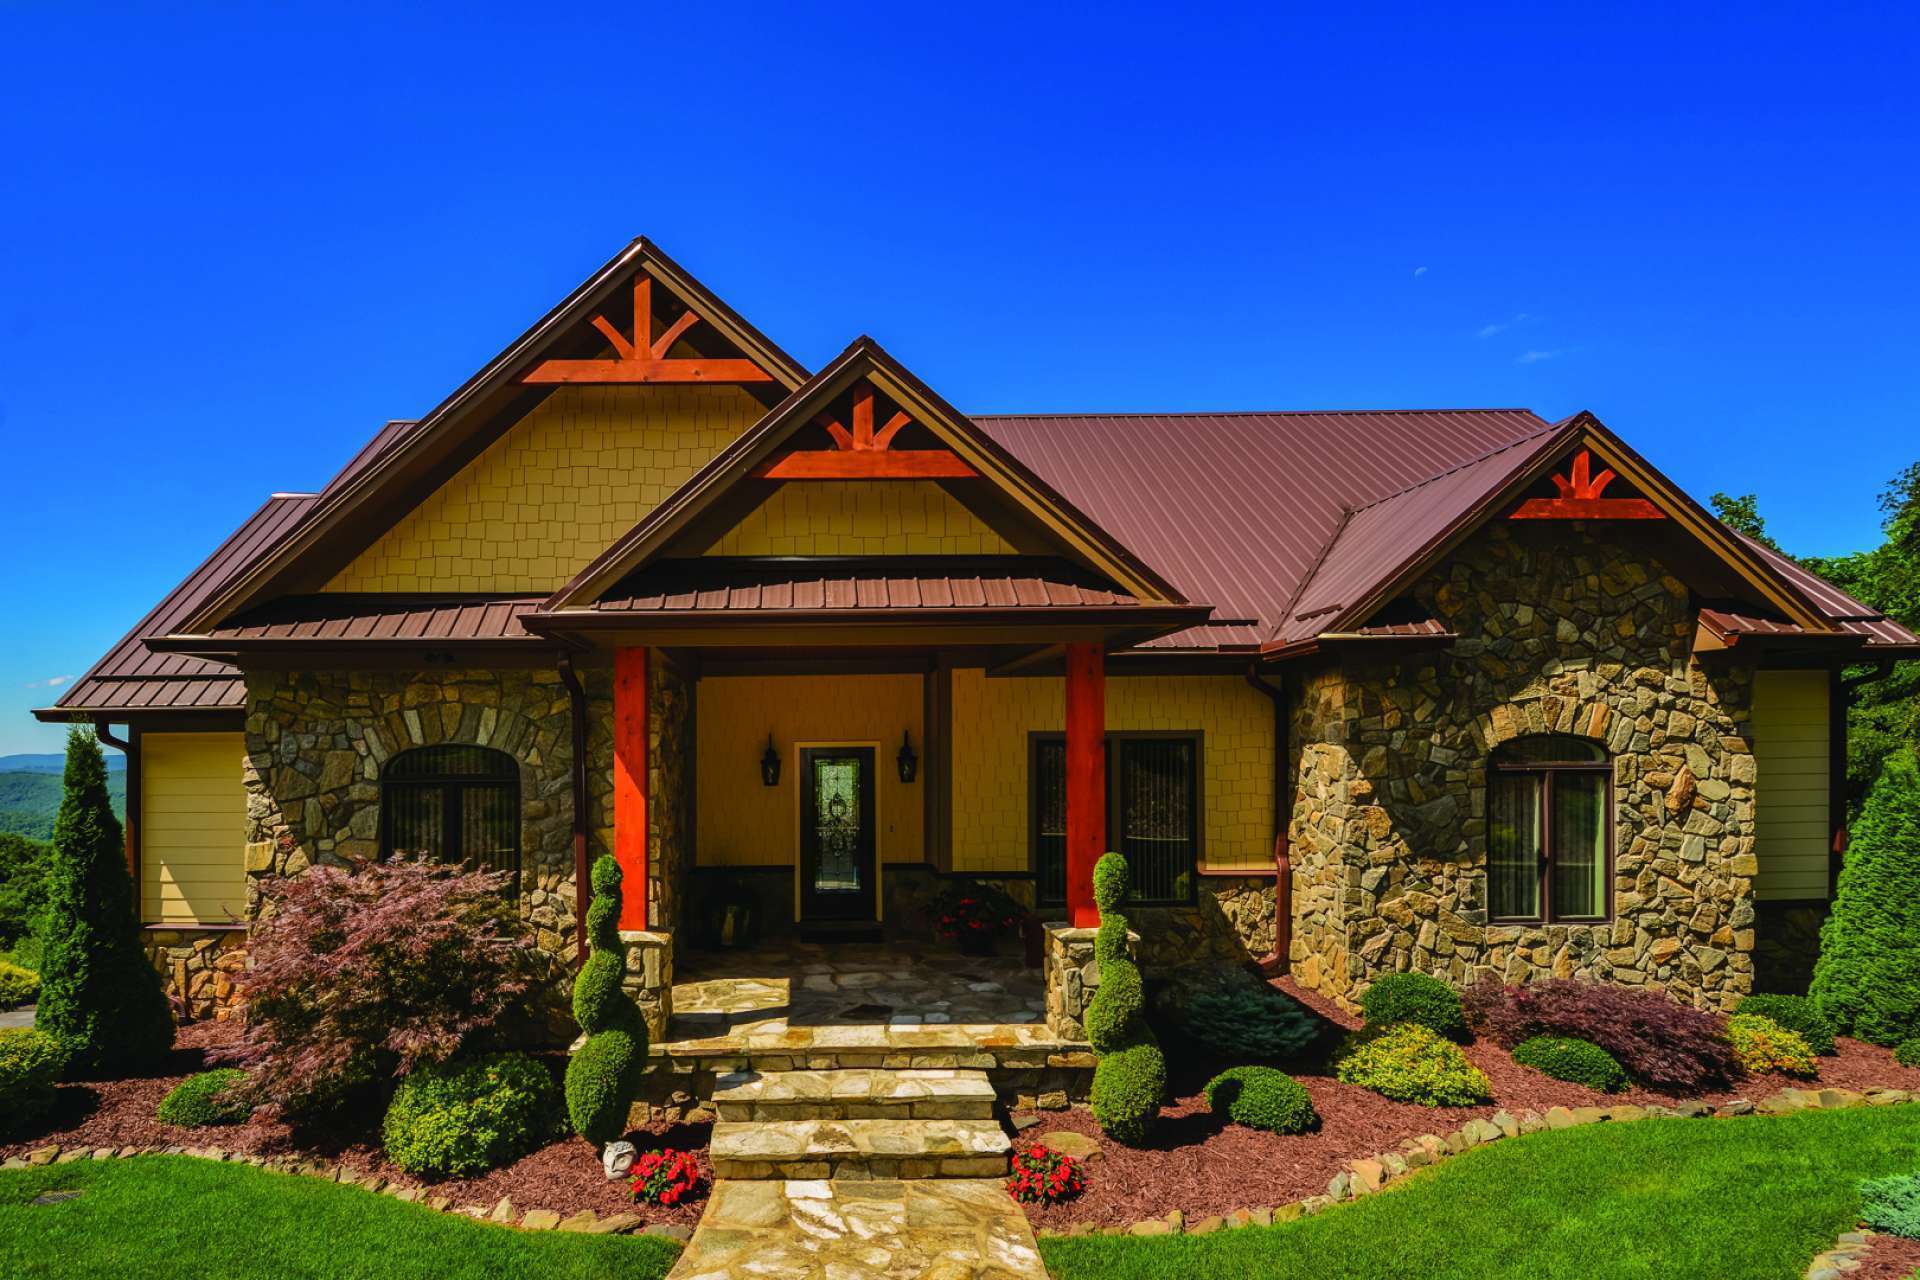 As you approach the home, the stone exterior and professionally landscaped yard with mature plants and trees convey an undeniable message of quality. *Notice the attention to detail in the wooden gable décor along the roofline and the arched window casings, as well as the stone front steps, porch and walkway.